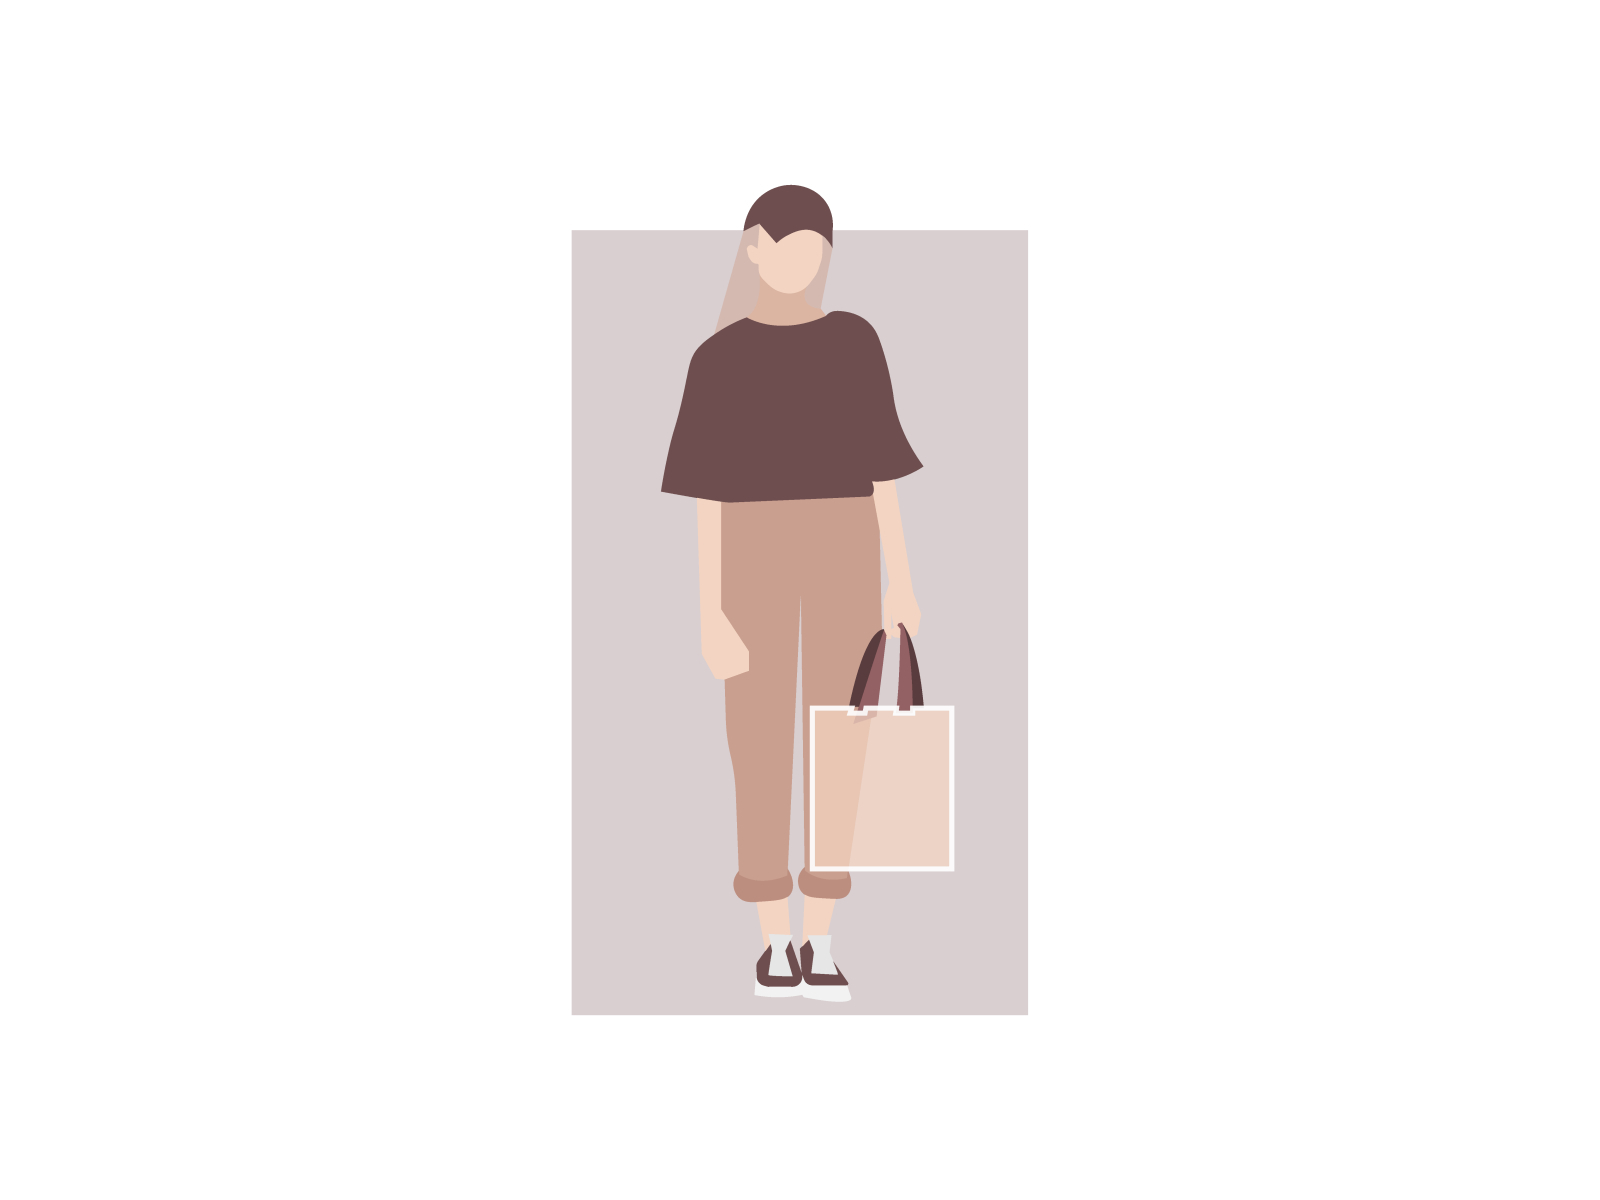 Flat Character Design by ForteDesign on Dribbble